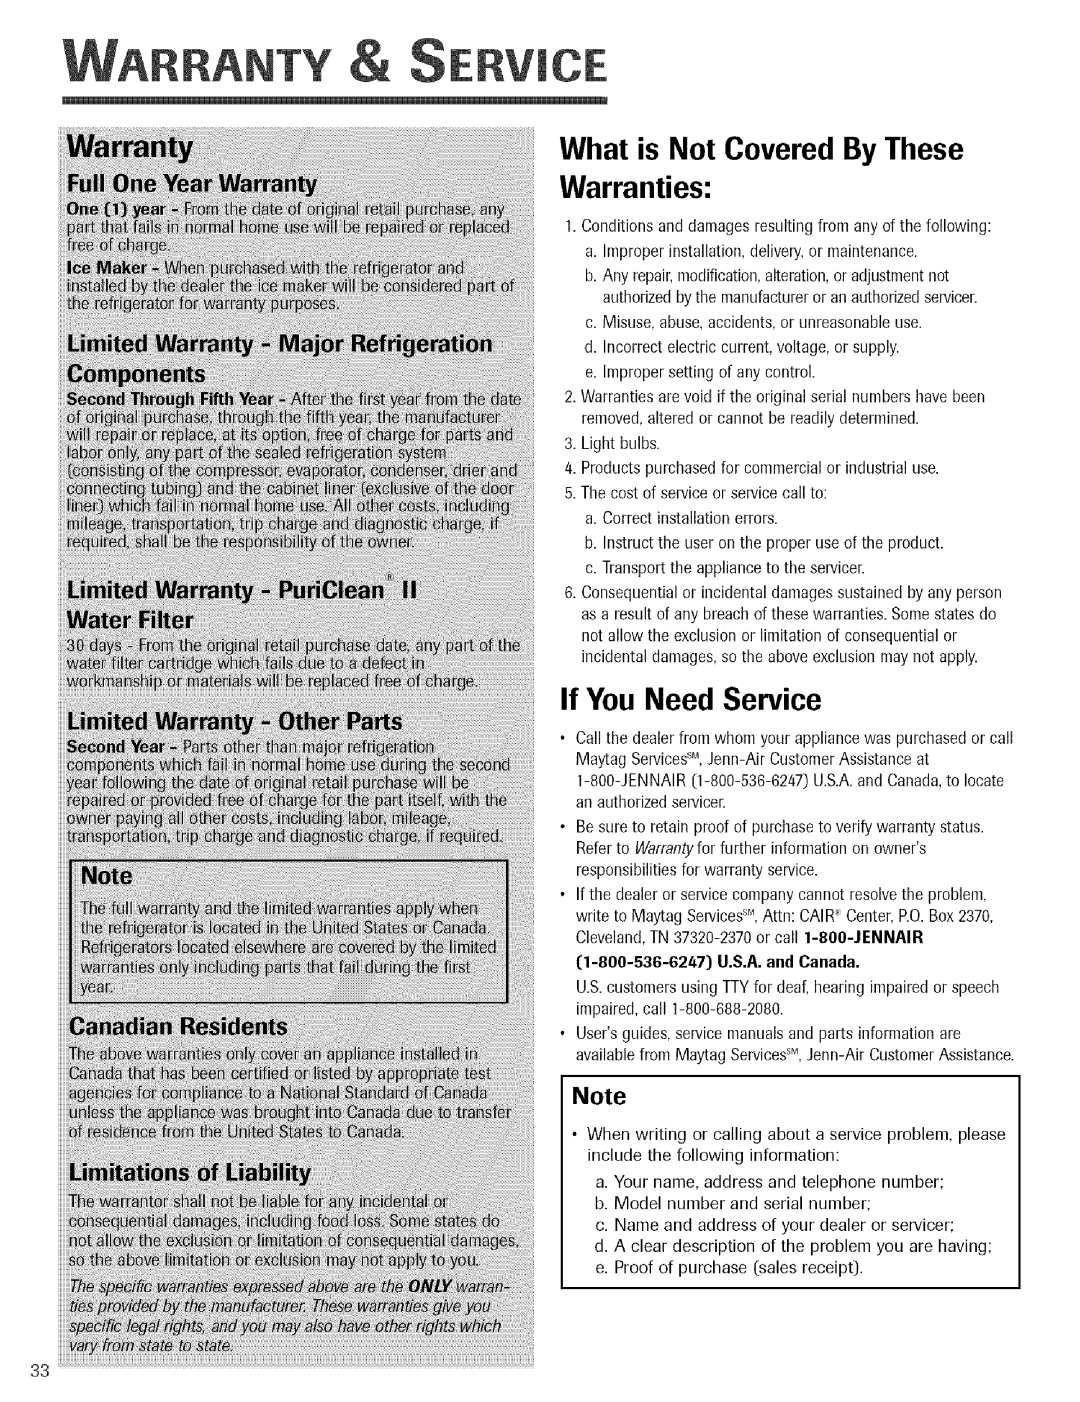 Jenn-Air Refrigerator important safety instructions What is Not Covered ByThese Warranties, If You Need Sewice 